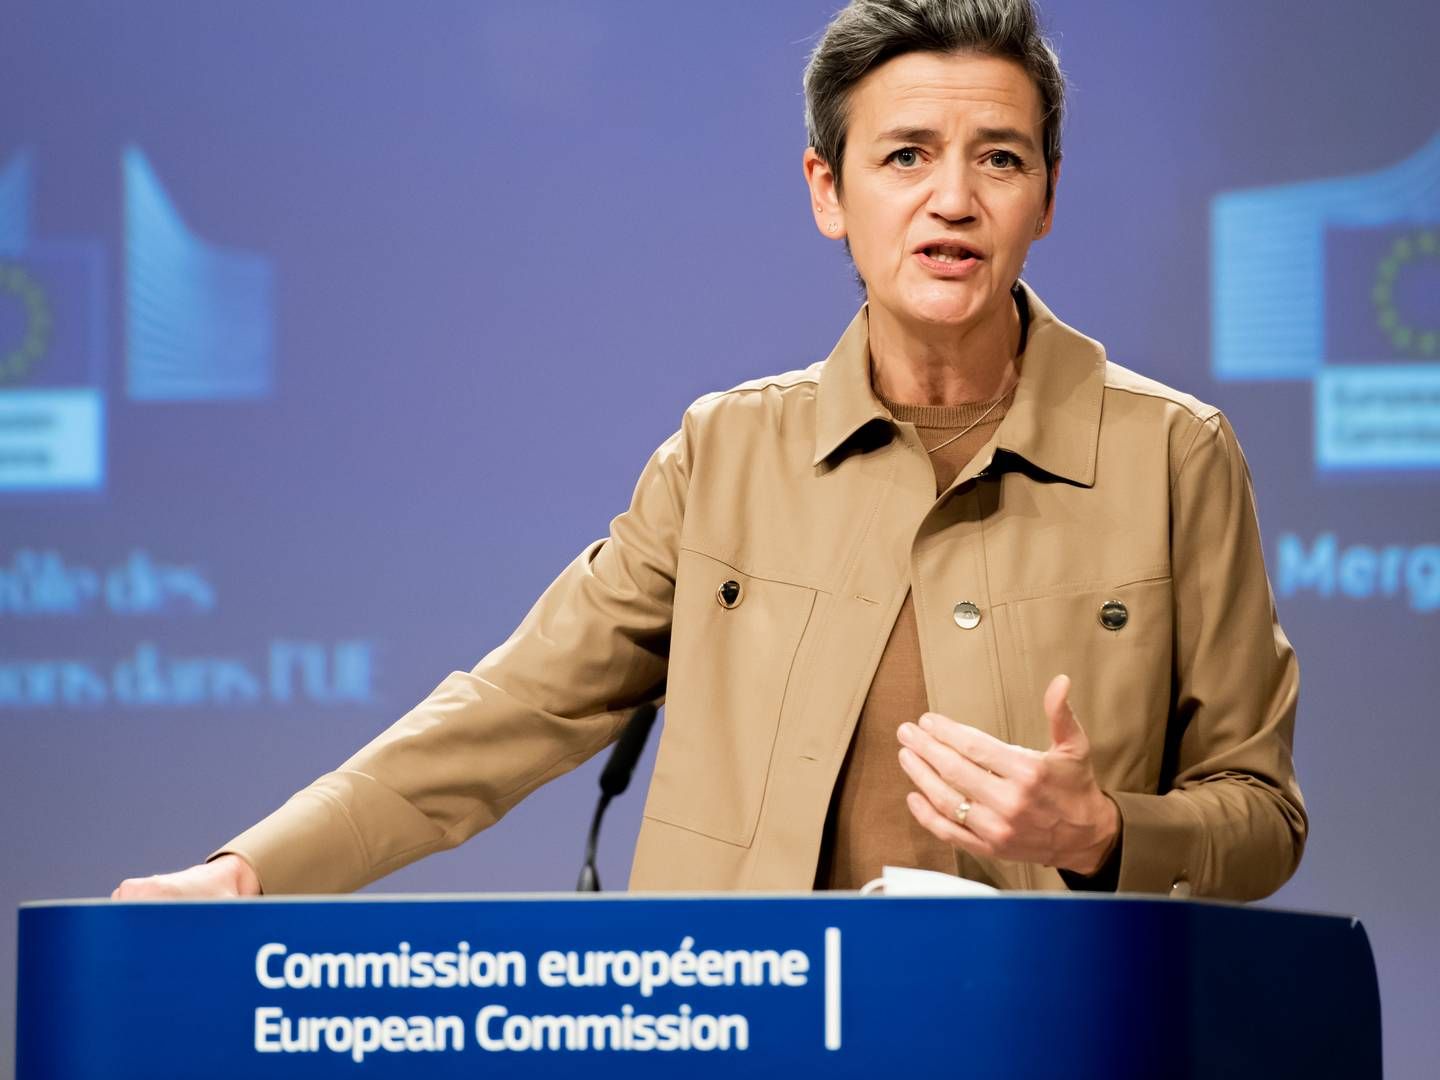 Margrethe Vestager, EU Commission's executive vice president for ”A Europe Fit for the Digital Age" | Foto: Jennifer Jacquemart / European Unio